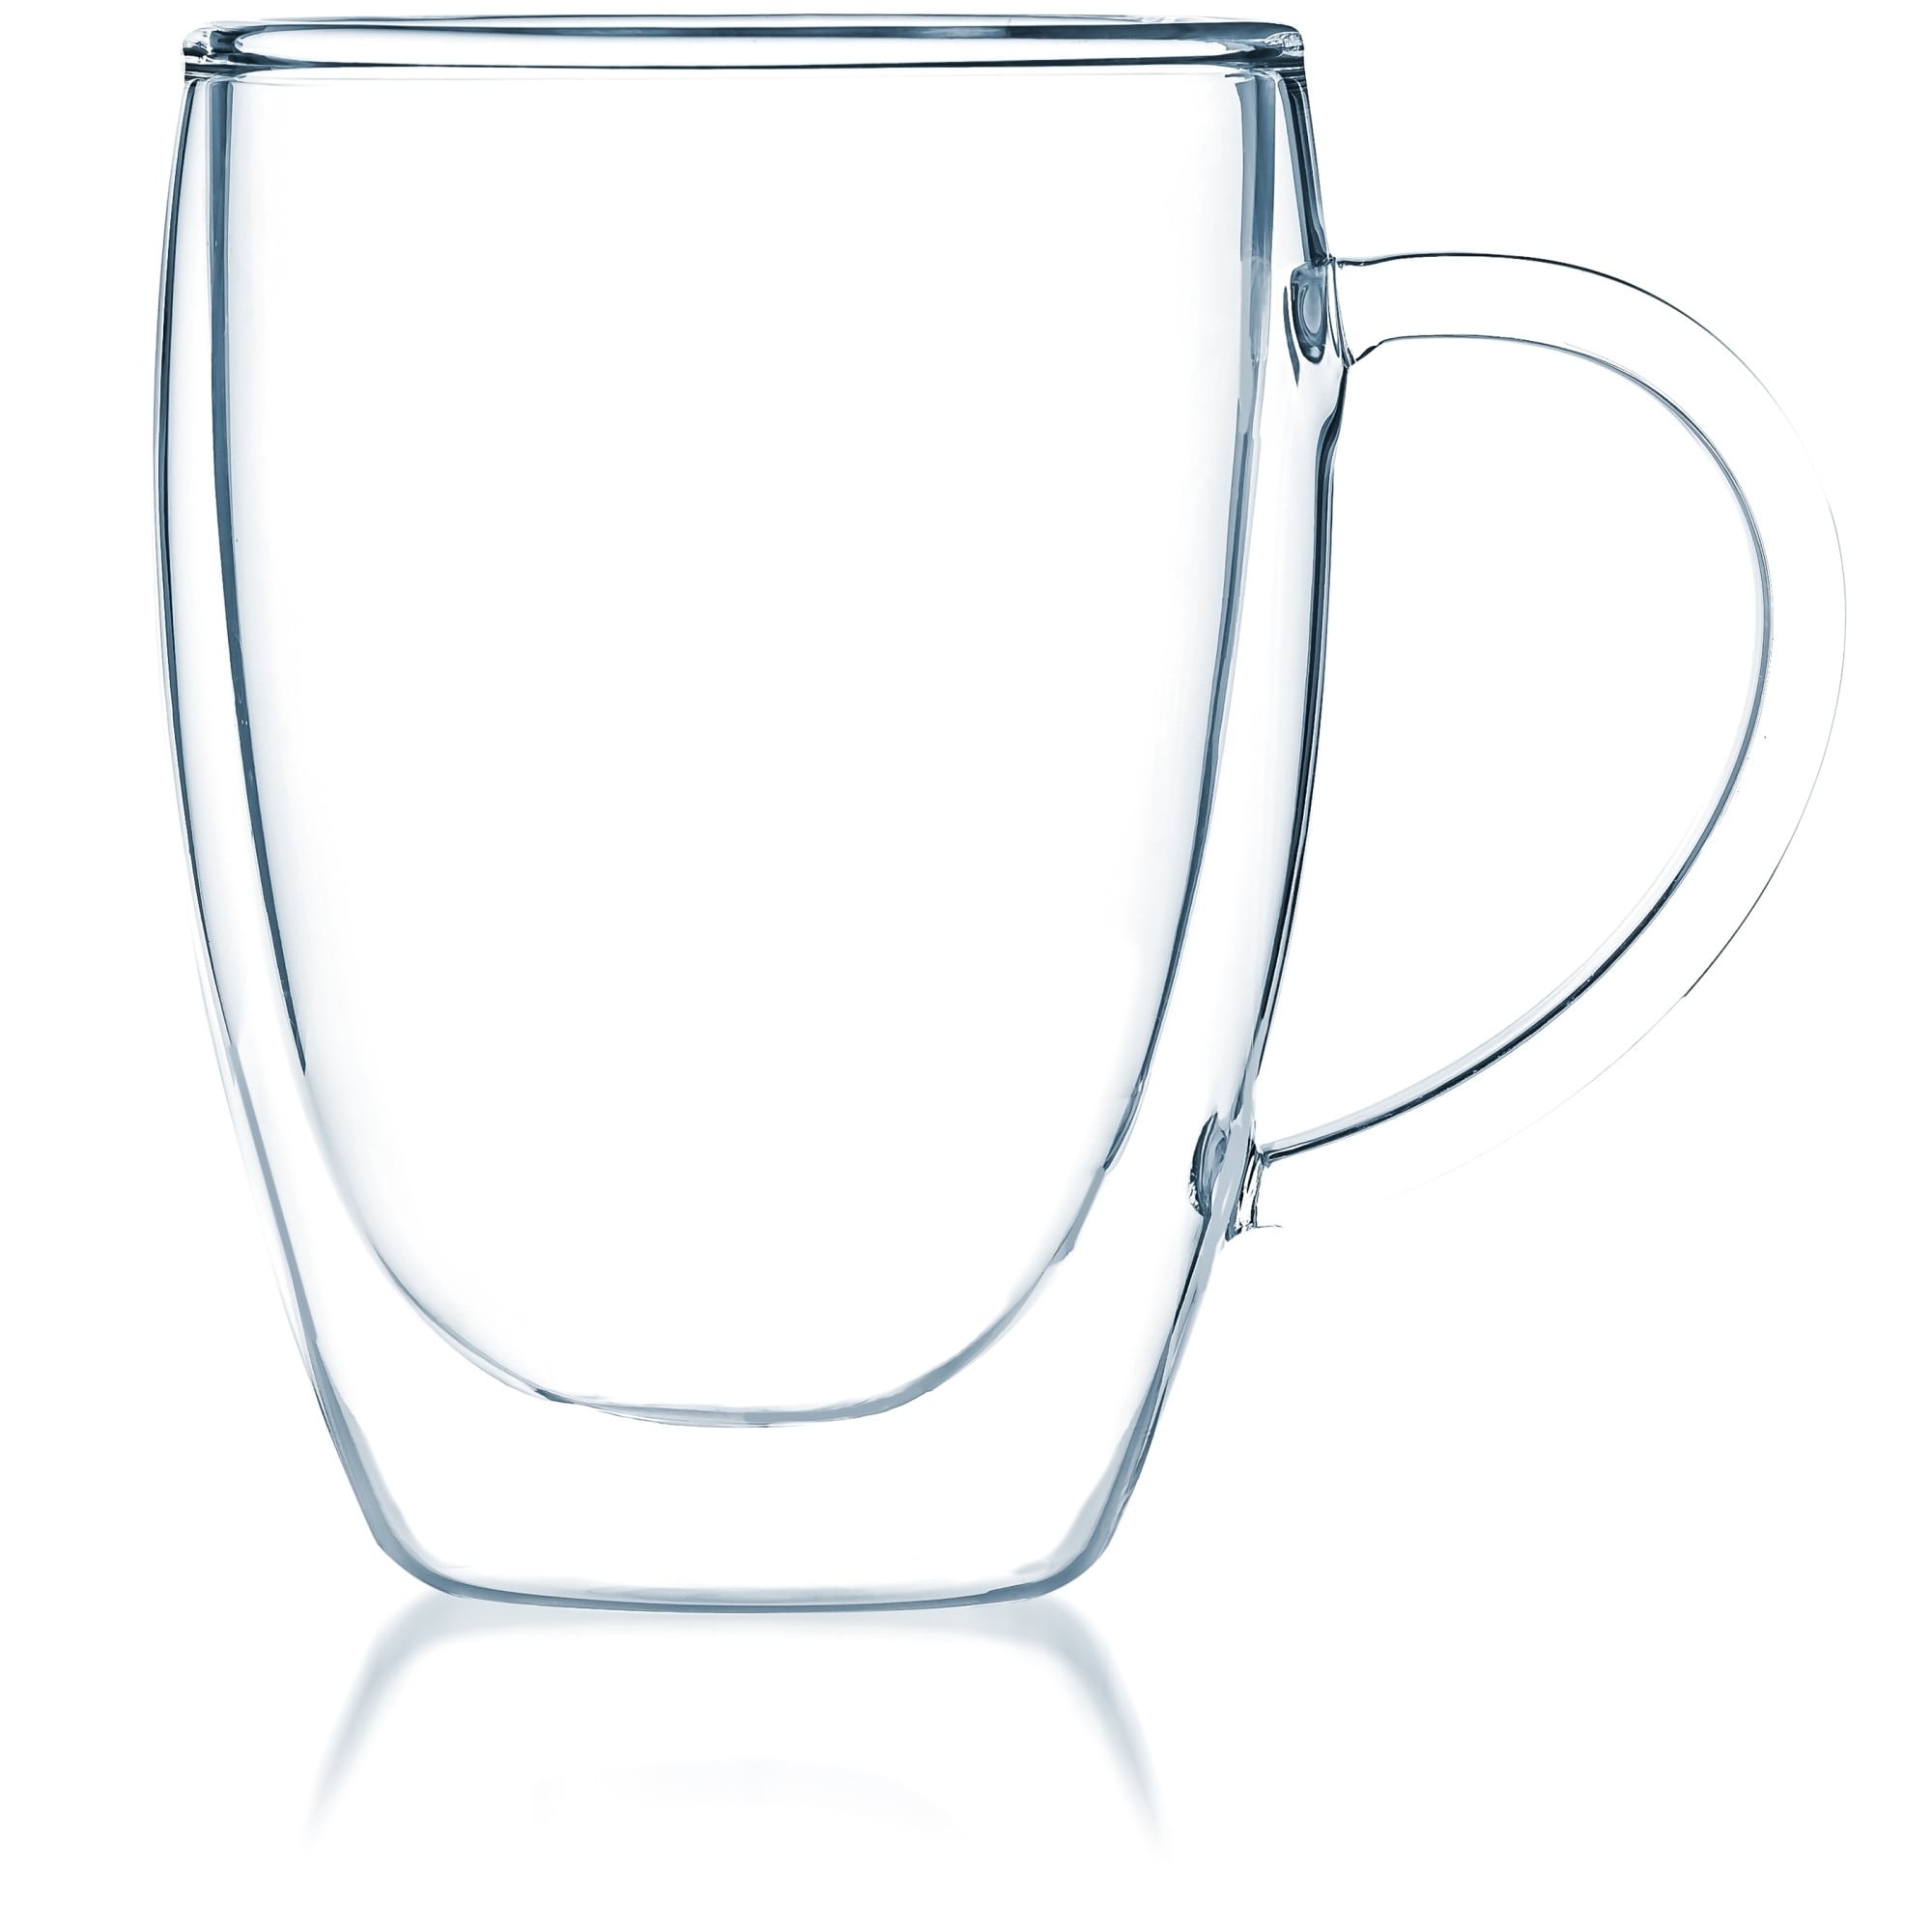 https://ak1.ostkcdn.com/images/products/14427905/JavaFly-Clear-Glass-12-ounce-Double-walled-Thermo-Bistro-Mug-with-Handle-Set-of-2-38f1273e-d6a7-4477-8516-78b23f25d12c.jpg